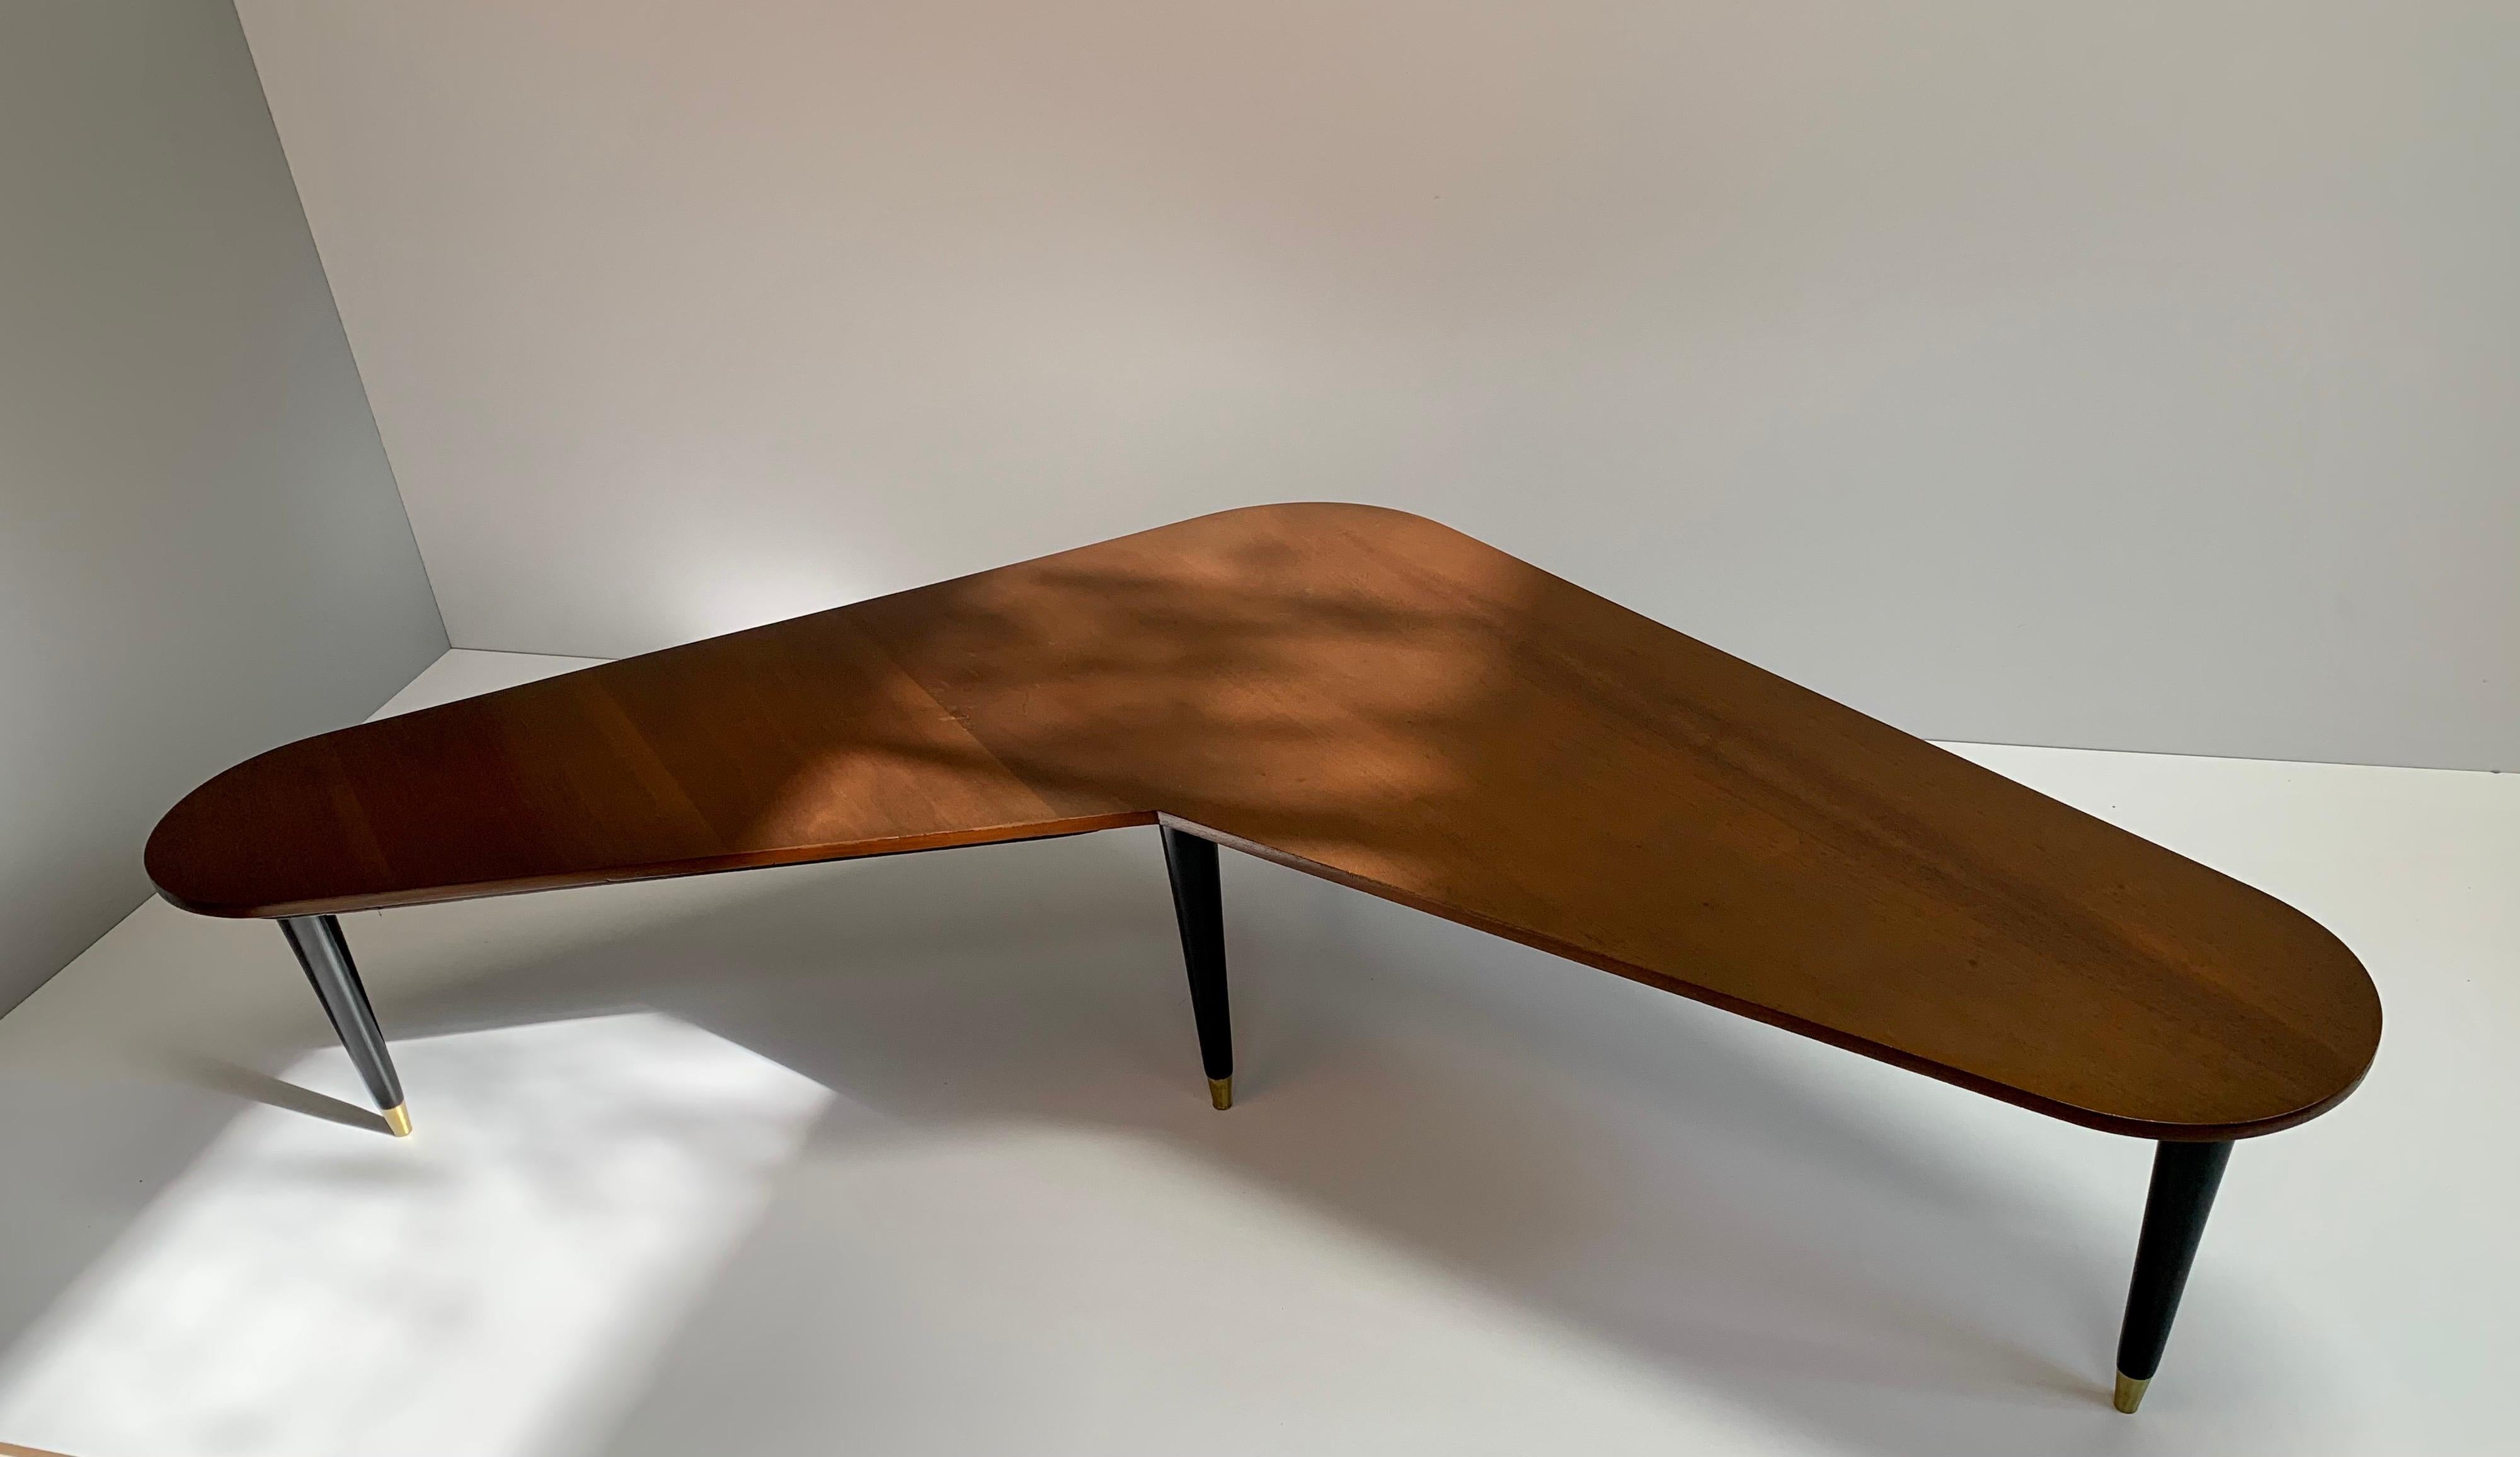 For your consideration, boomerang shaped table made in the 1960s, mahogany wood and brass leg bushings, professionally restored.